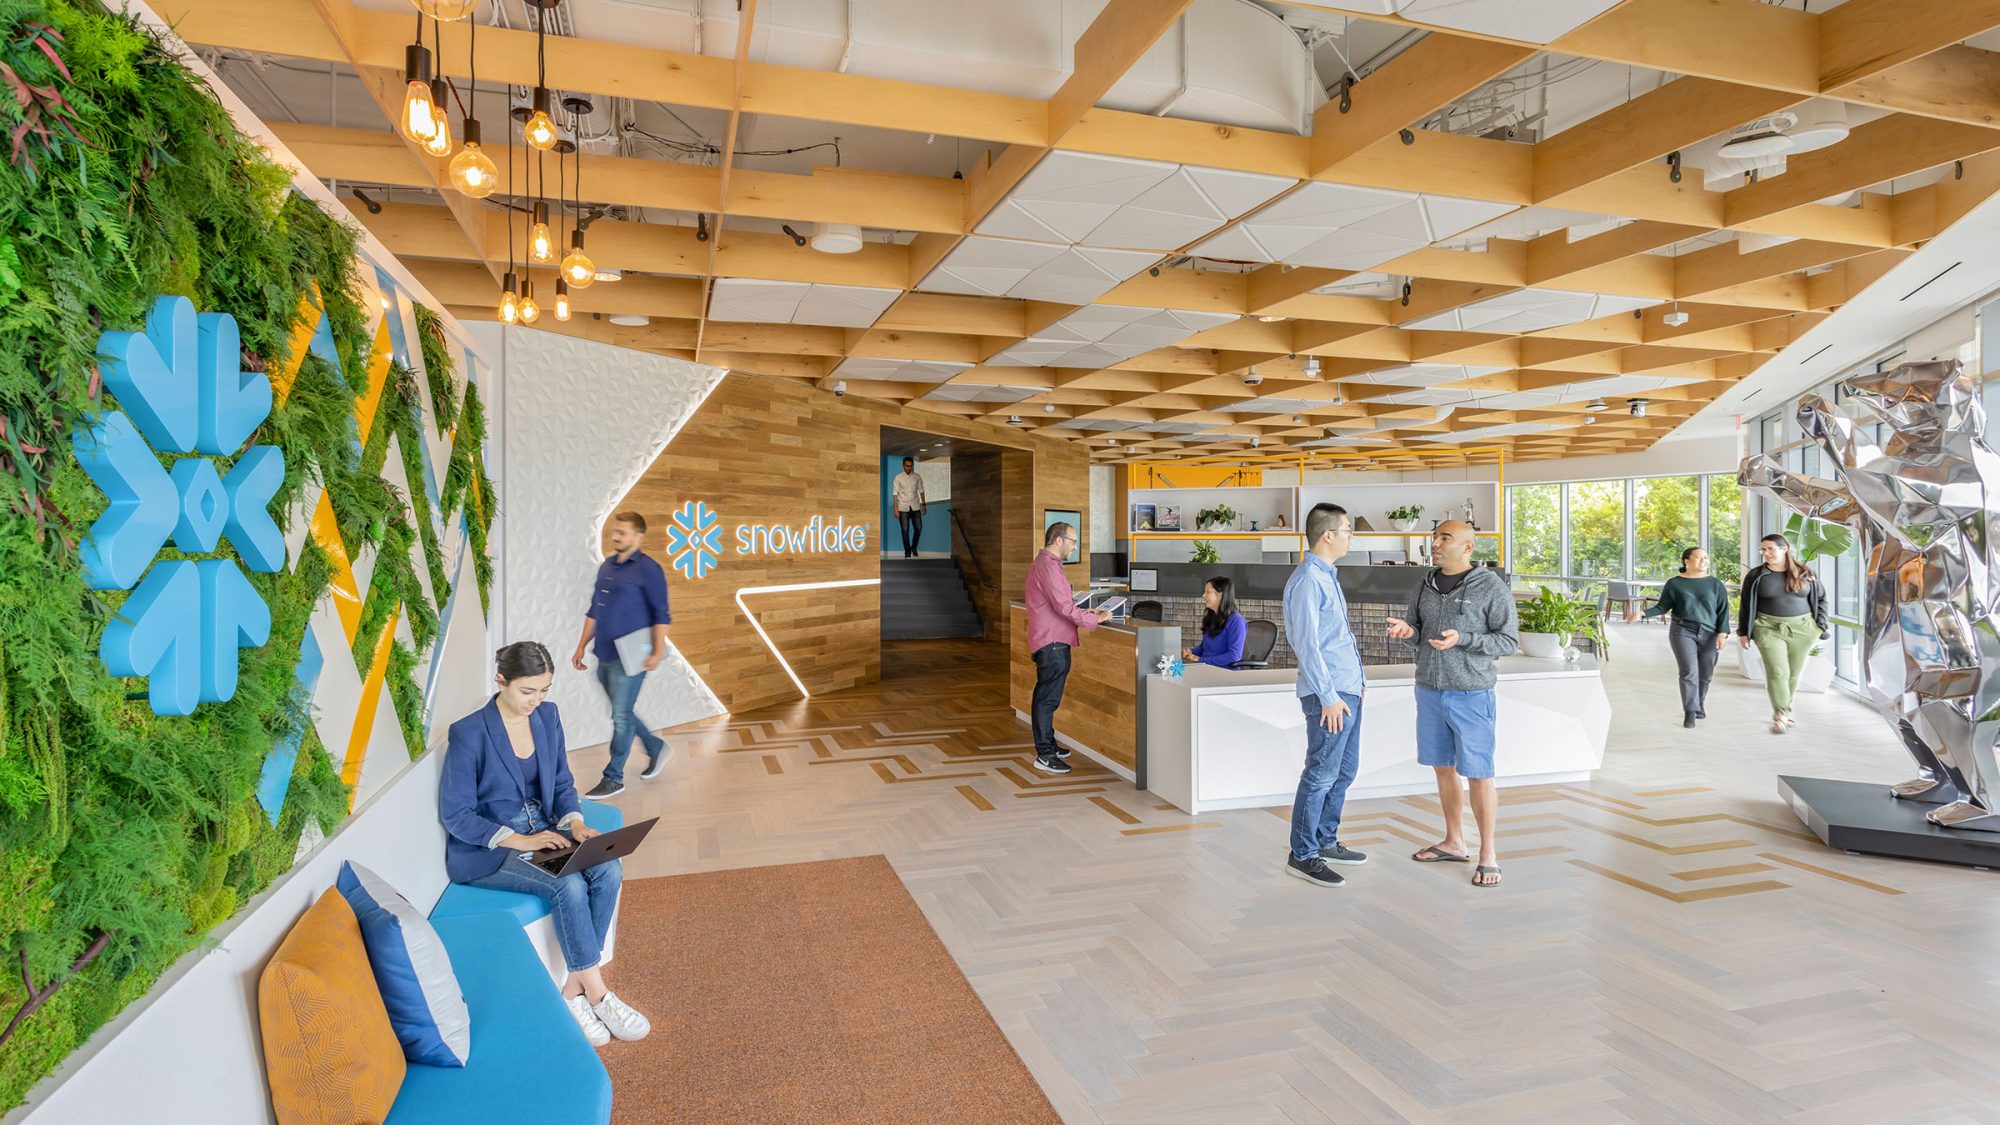 The main entrance lobby to Snowflake’s global headquarters features custom logo signage, a green wall, integrated lighting and materials that evoke a snowy mountain design.